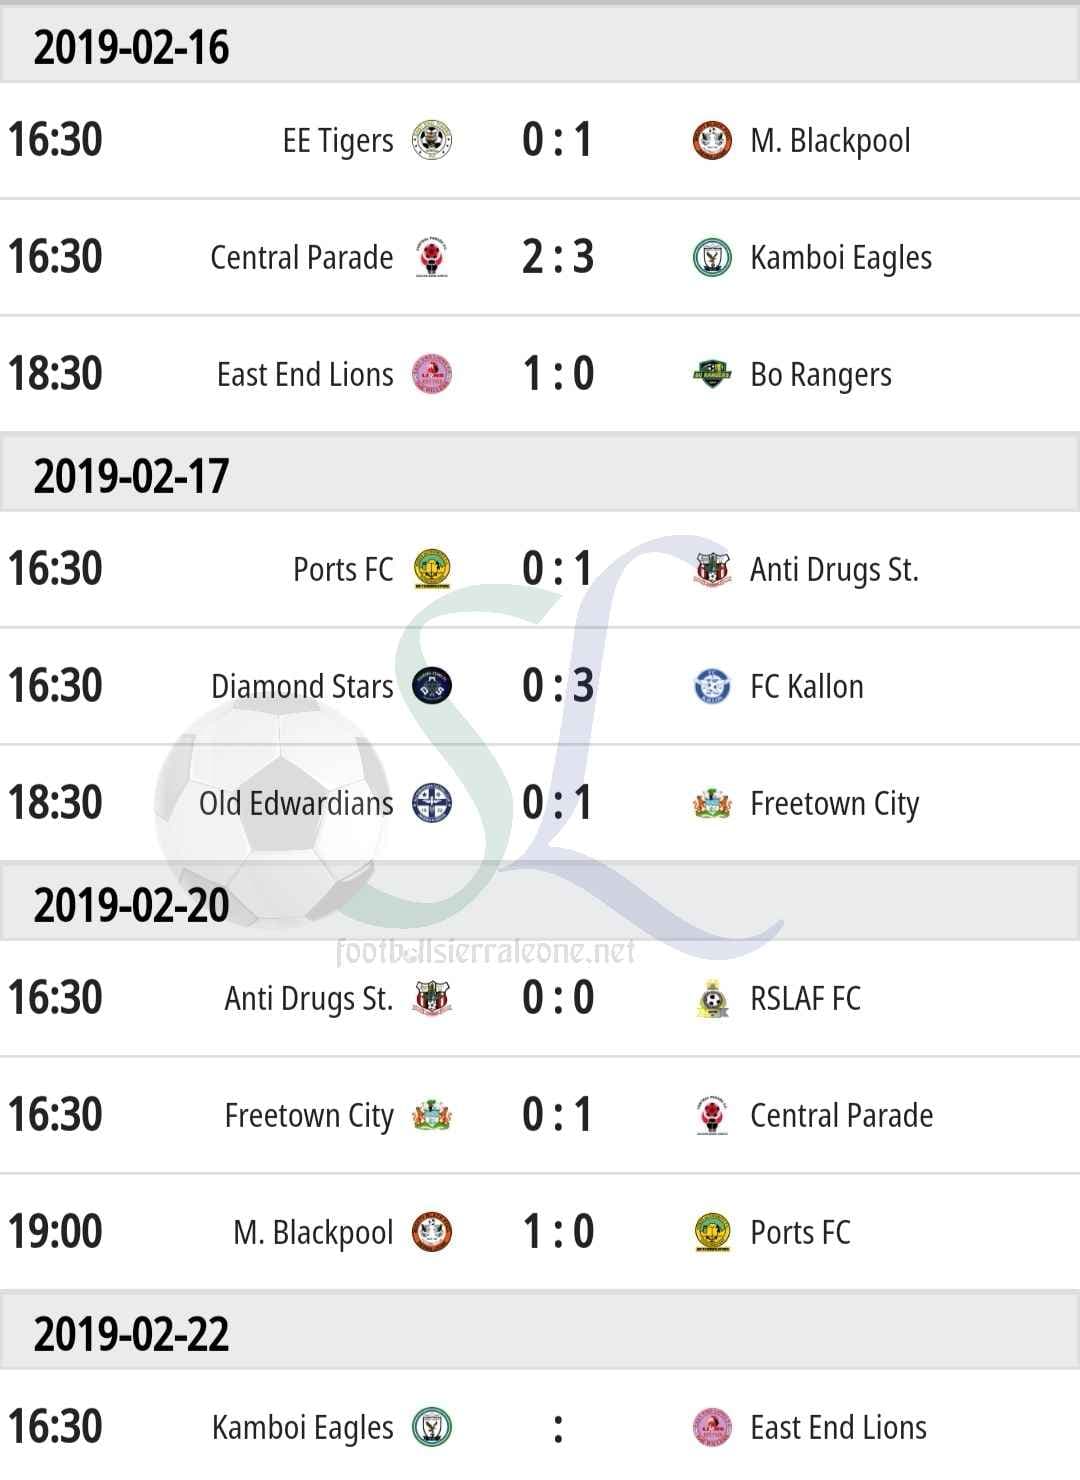 "Recent League matches and results"